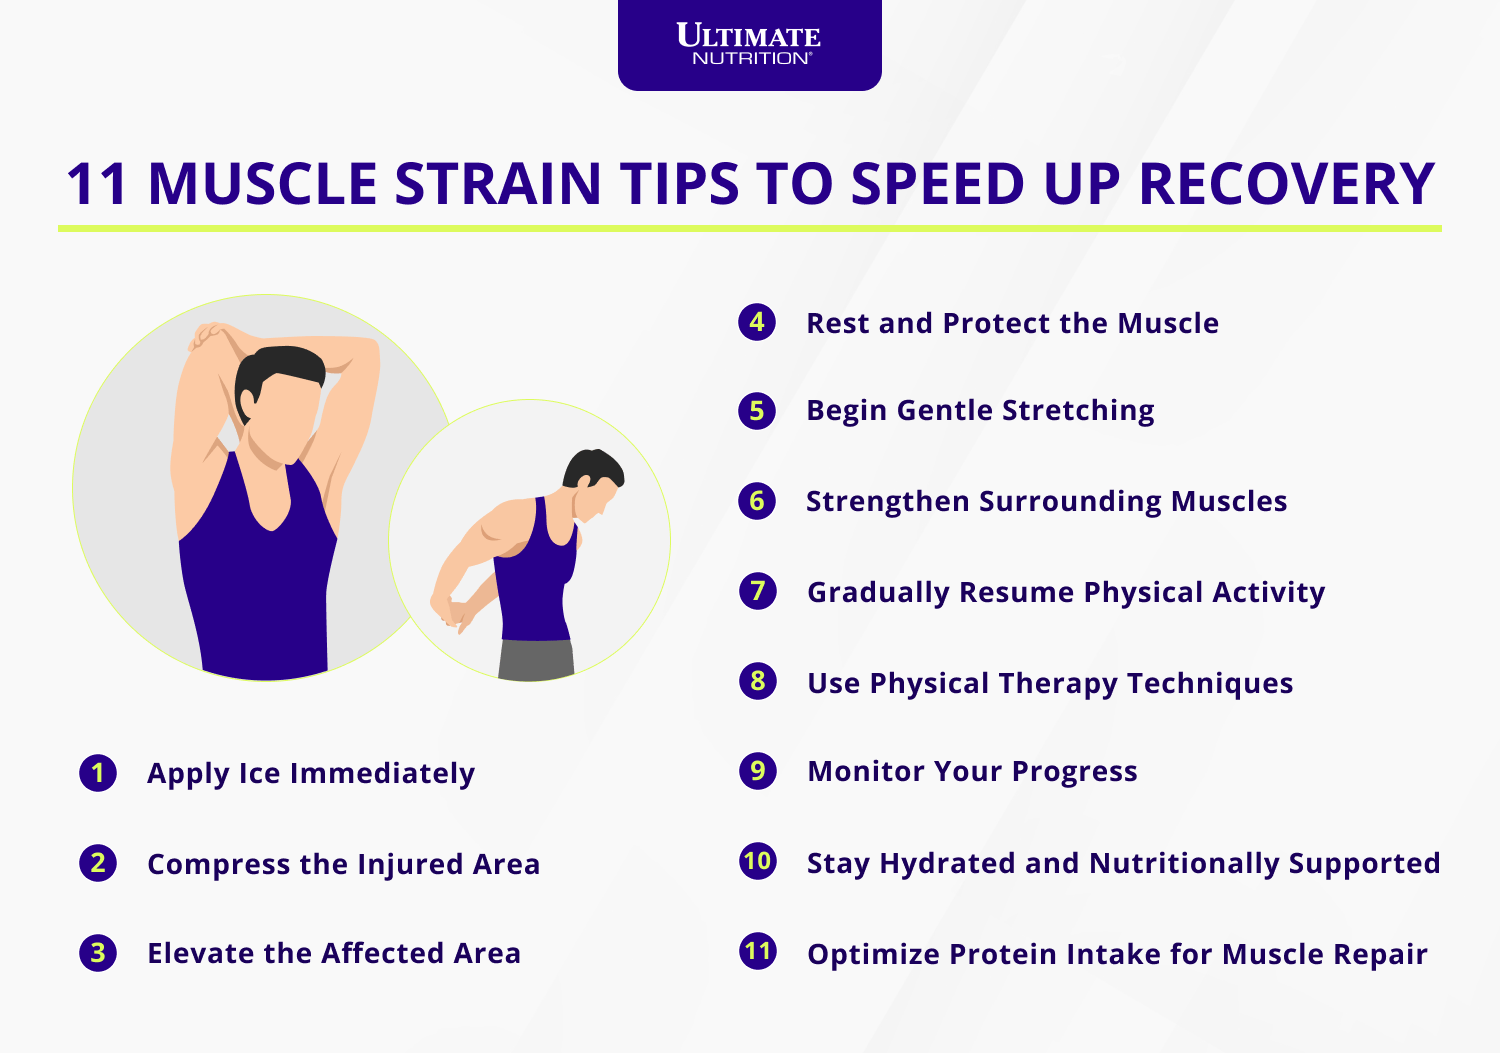 11 Muscle Strain Tips to Speed Up Recovery | Ultimate Nutrition